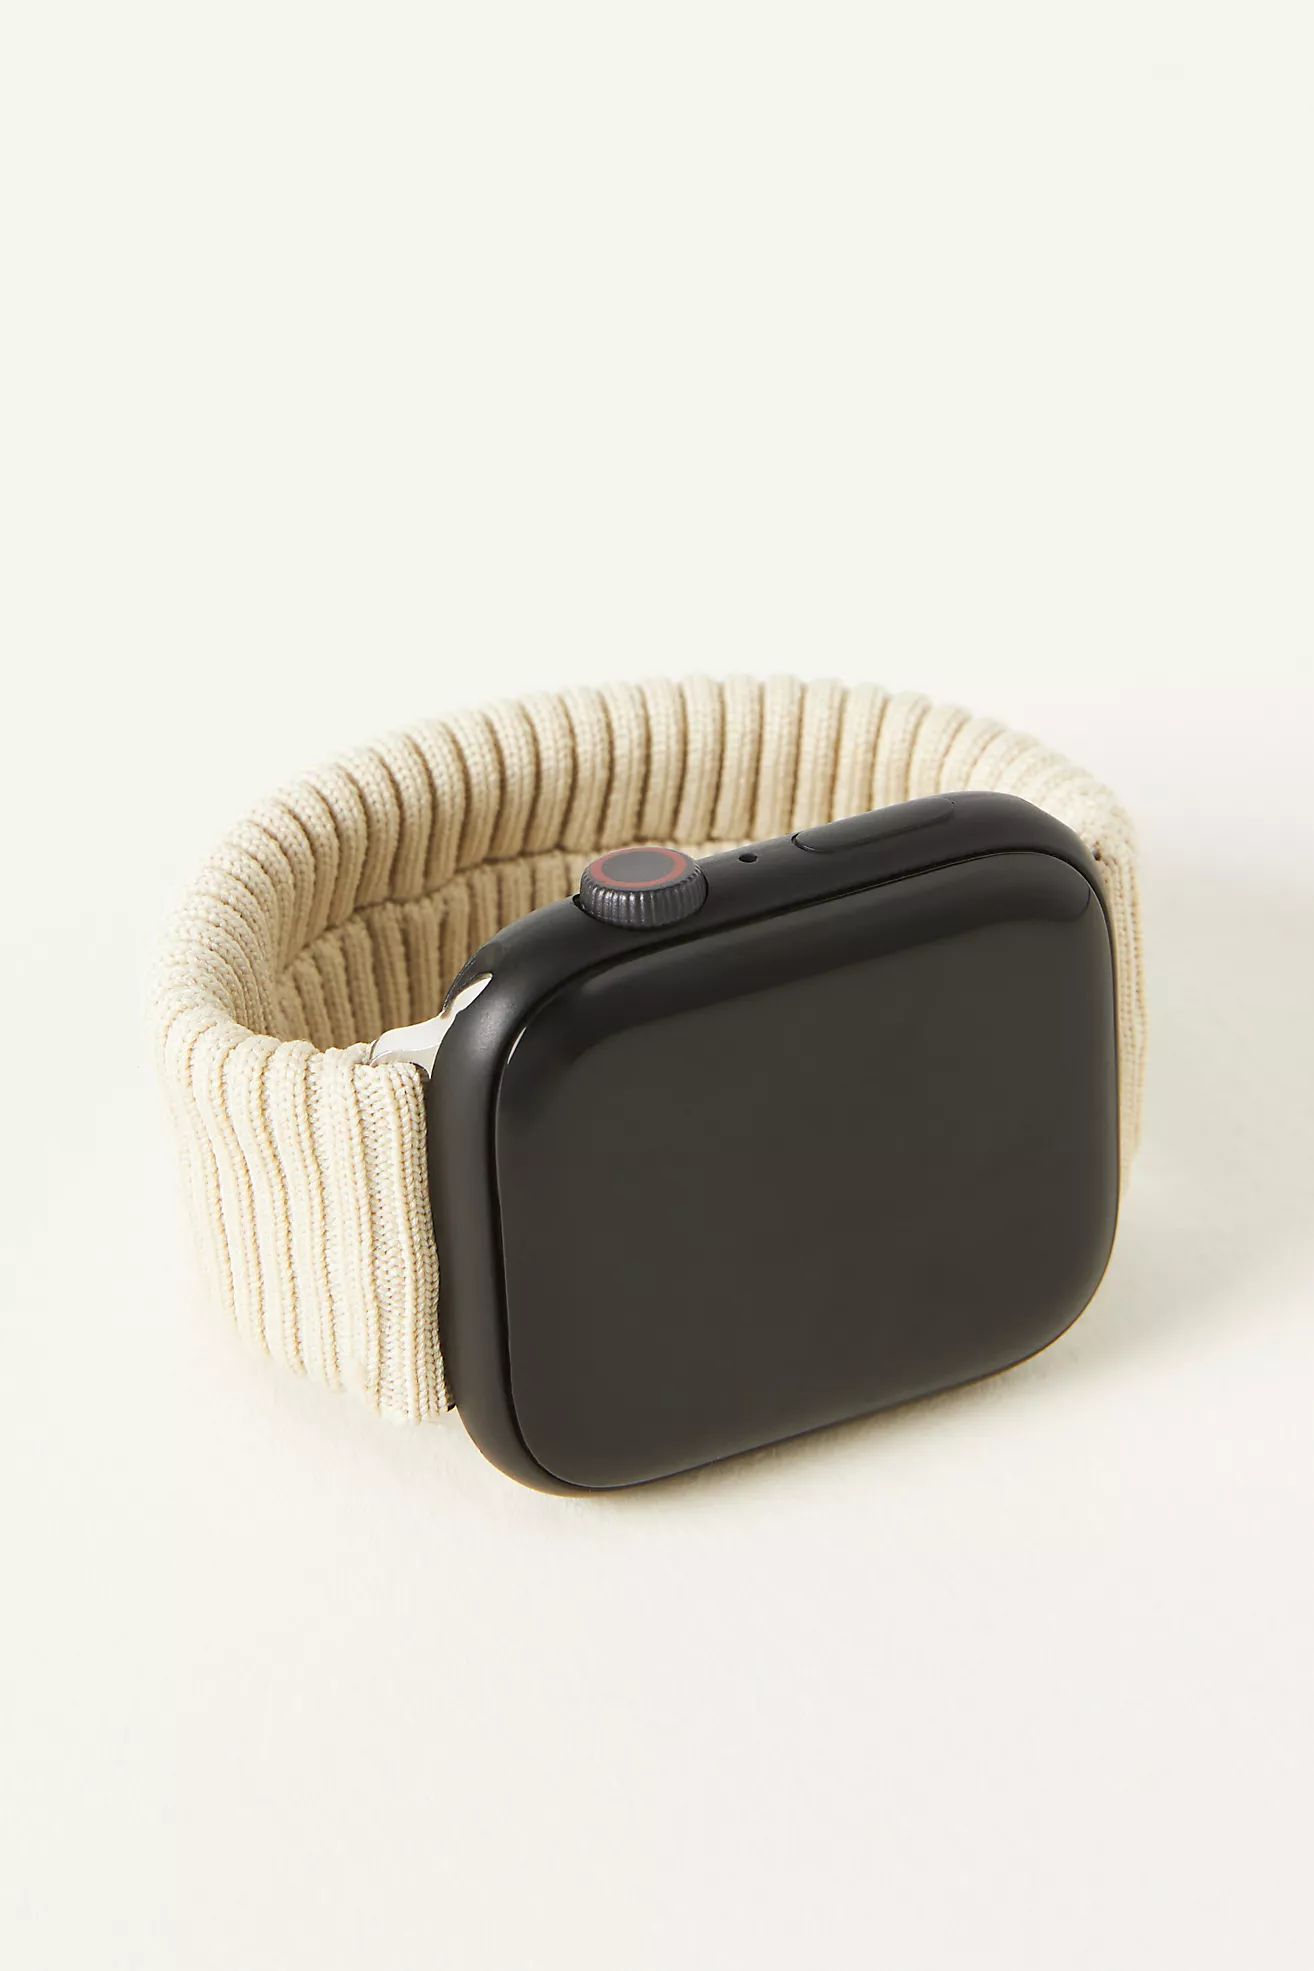 Sonix Knit Apple Watch Band | Anthropologie (US)